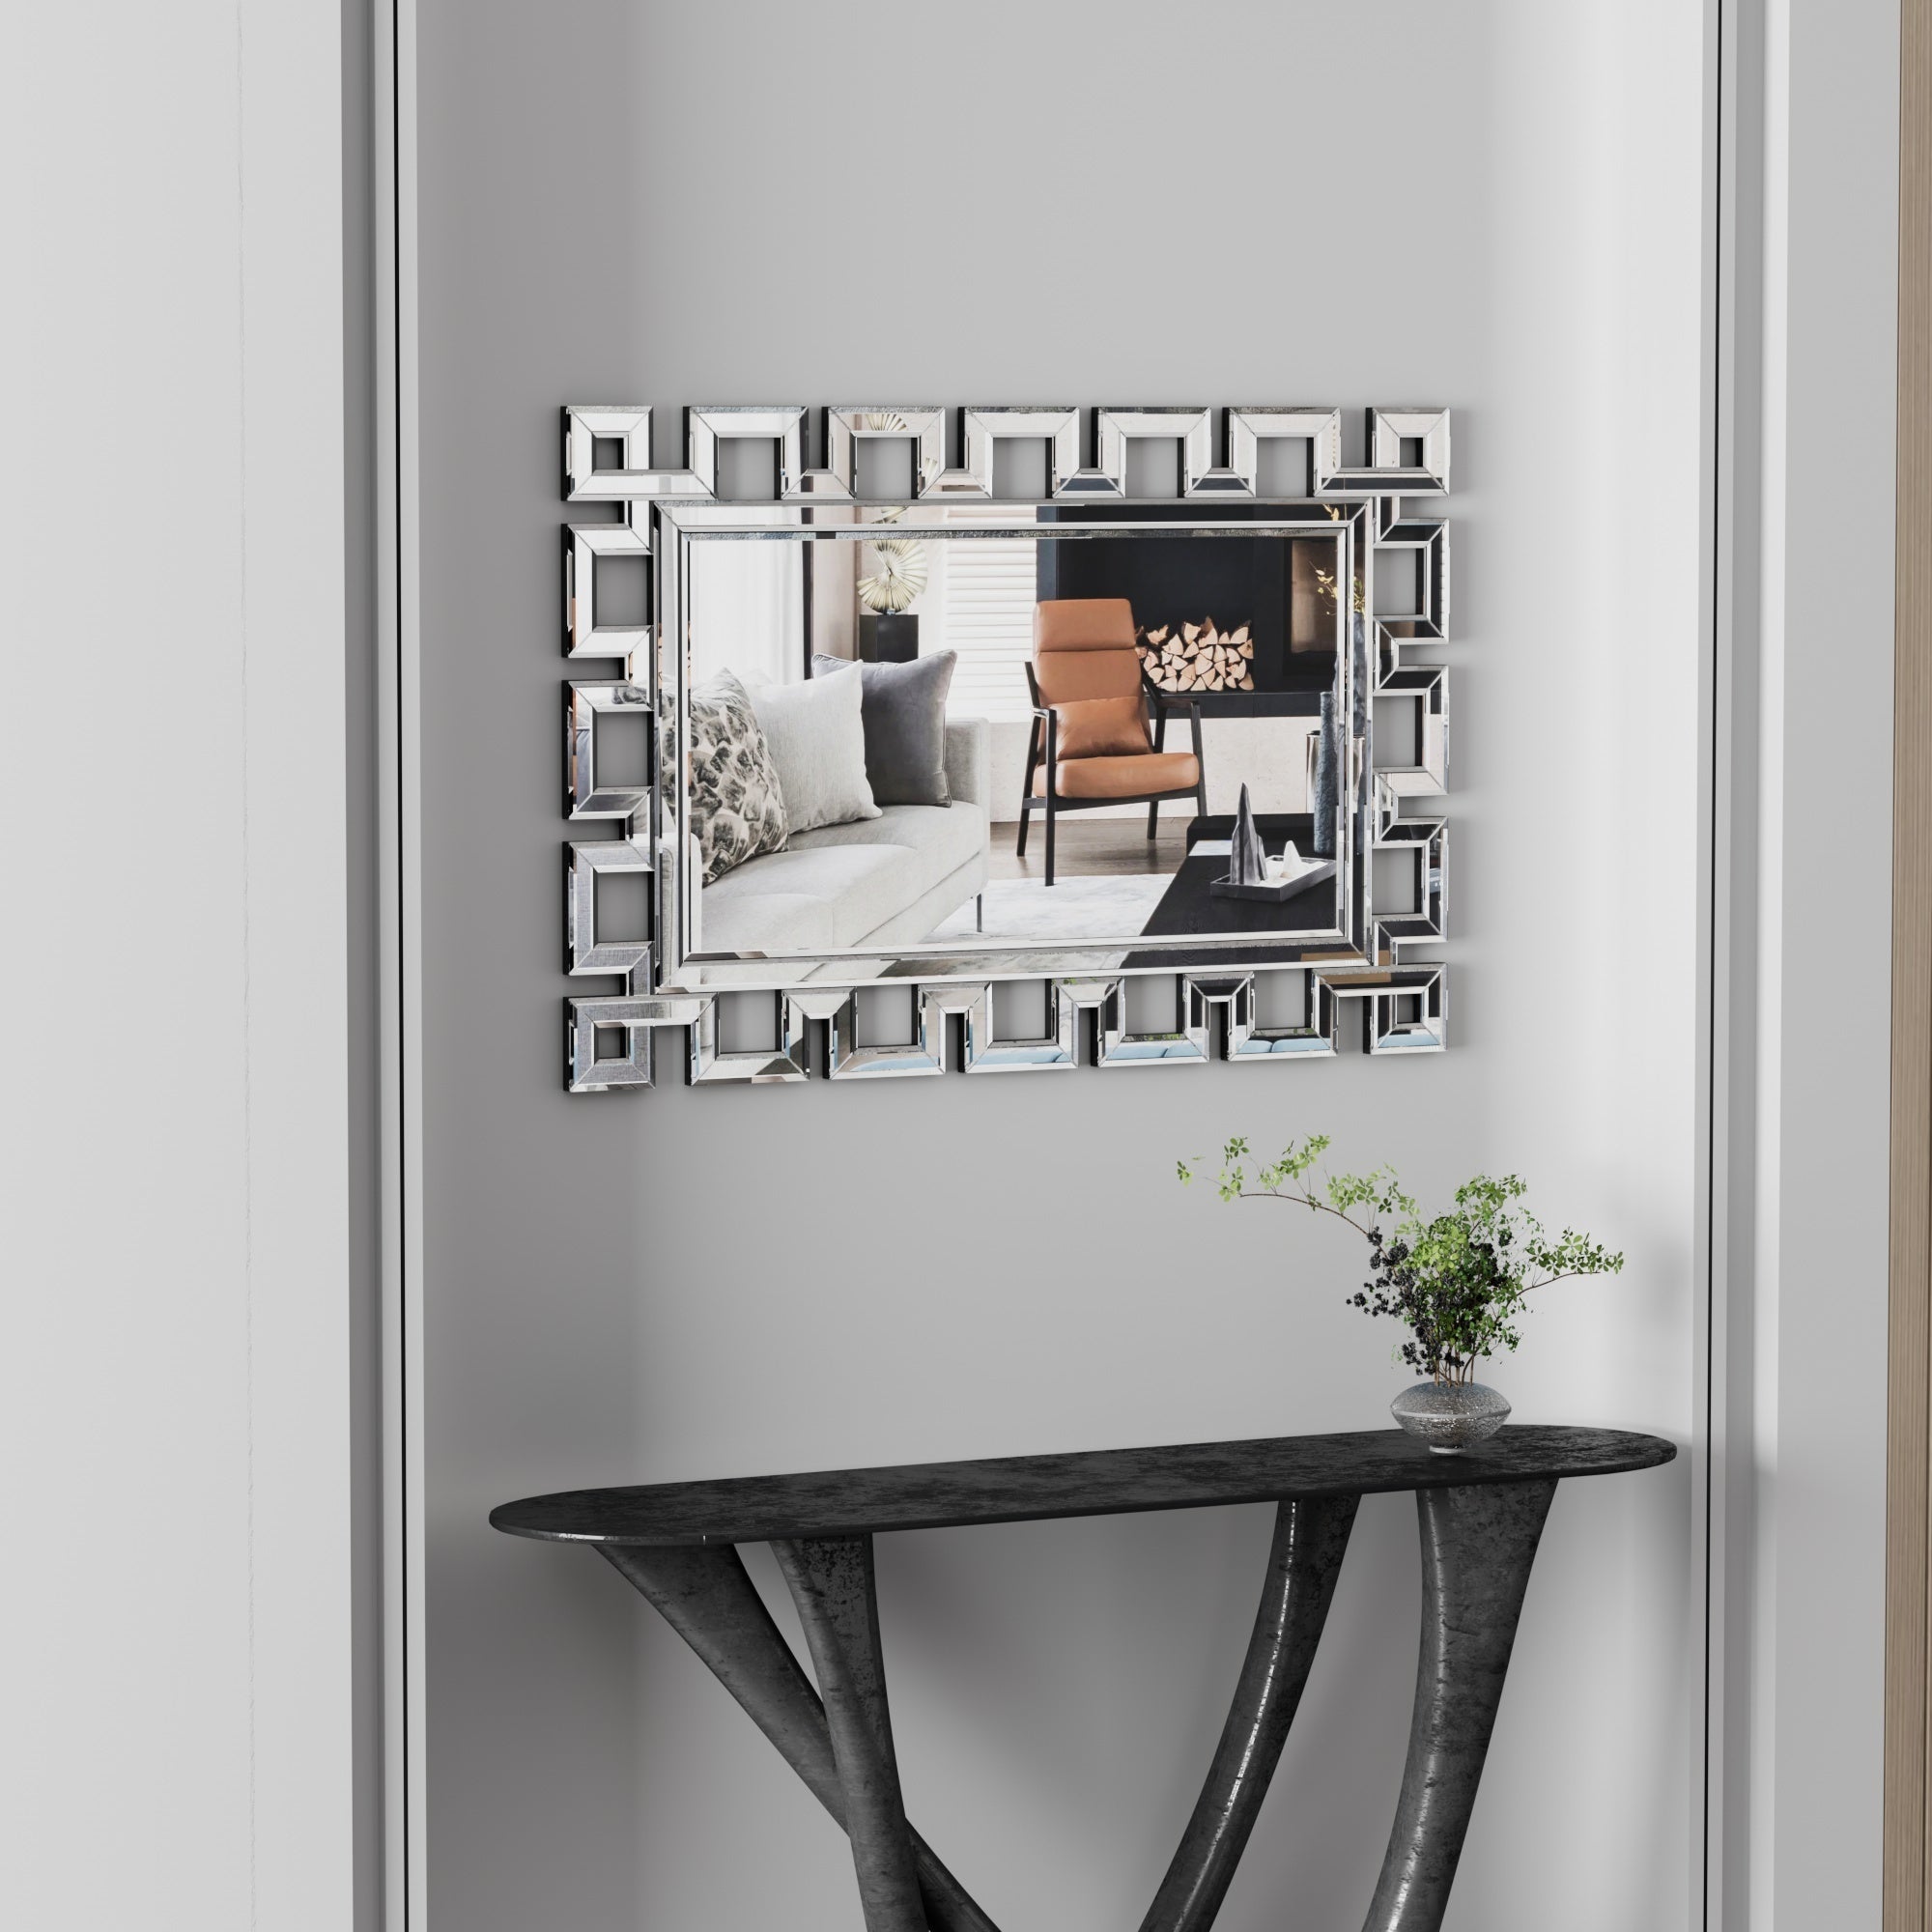 36" x 24" Rectangle Decorative Accent Wall Mirror